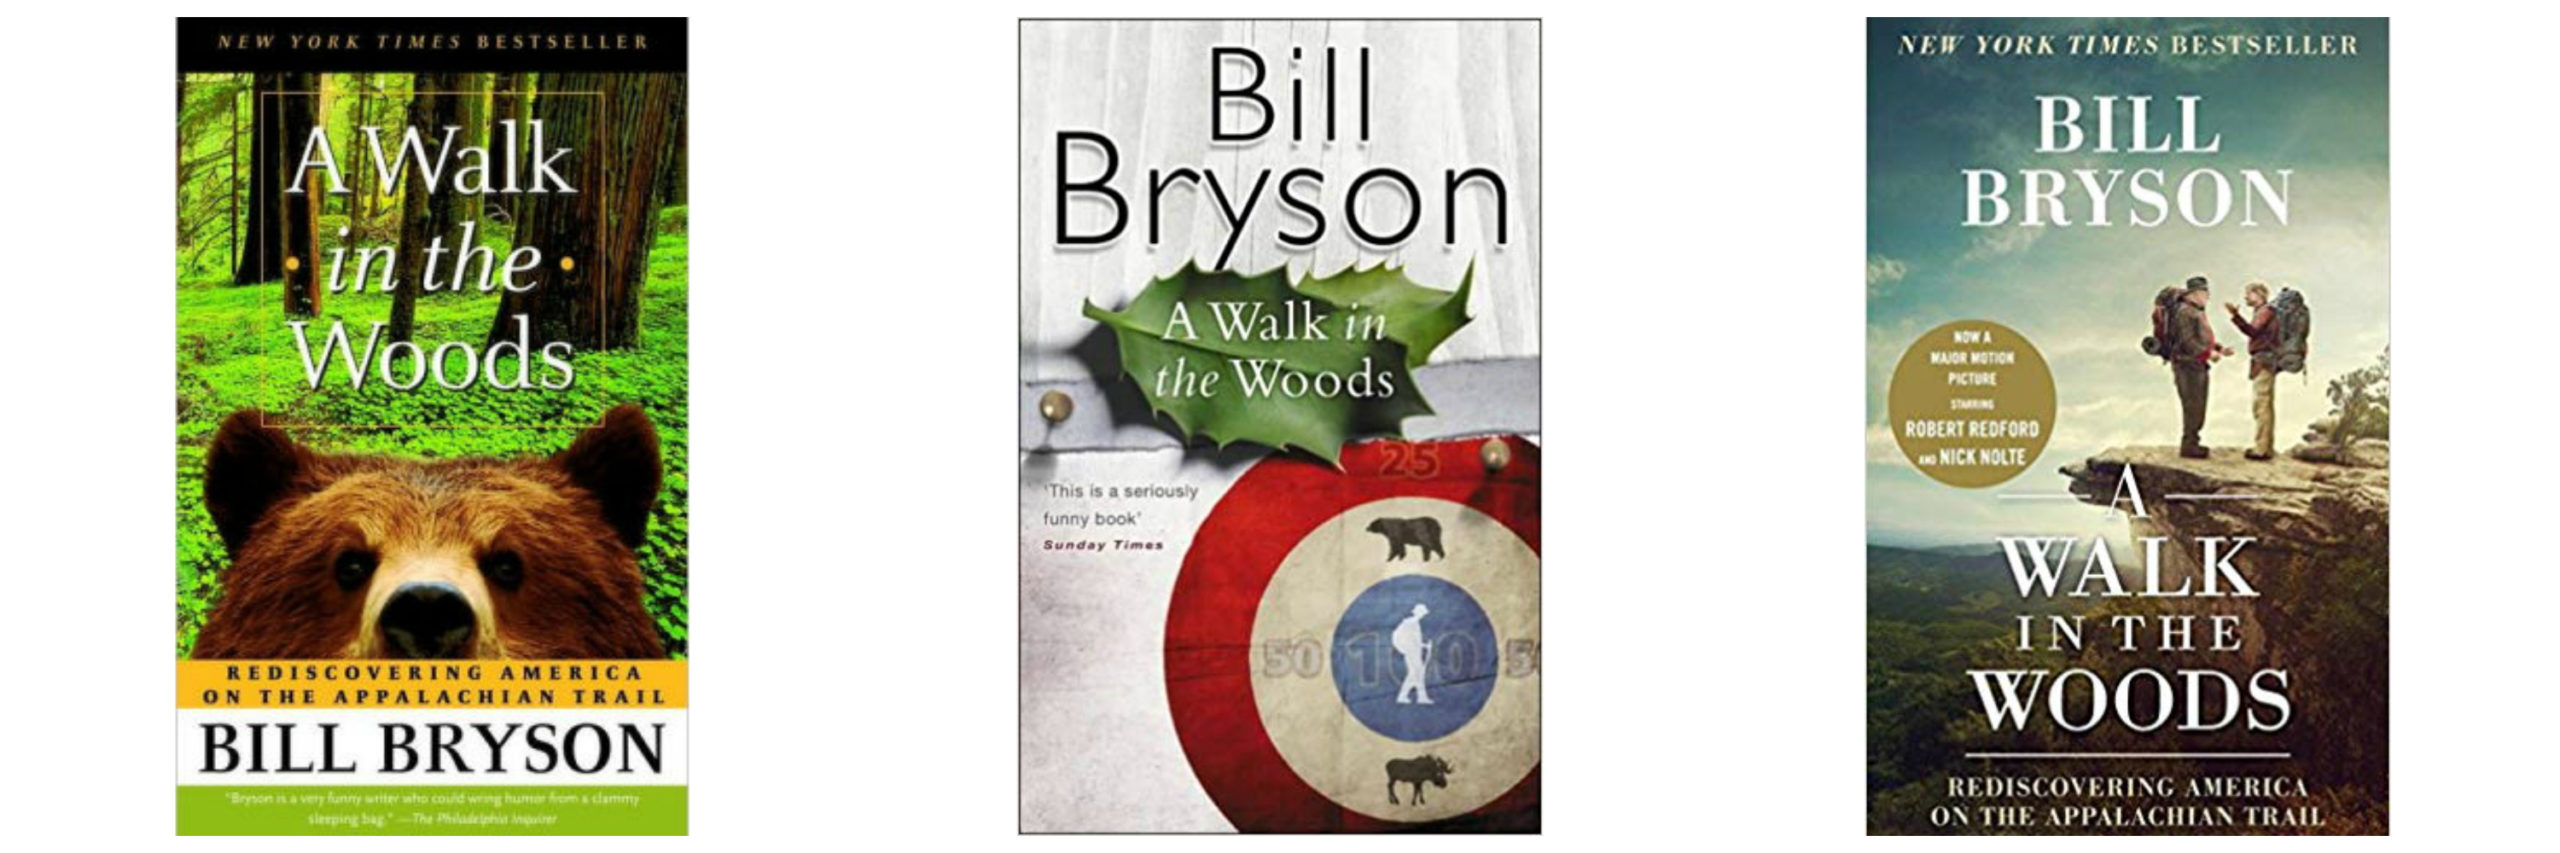 Three book covers for A Walk in the Woods: A bear looking out of the woods at the reader (left); A leaf and then the outline of a hiker and a bear in a circular graphic (center); Two hikers talking to each other (perhaps arguing) on a cliff edge (right).